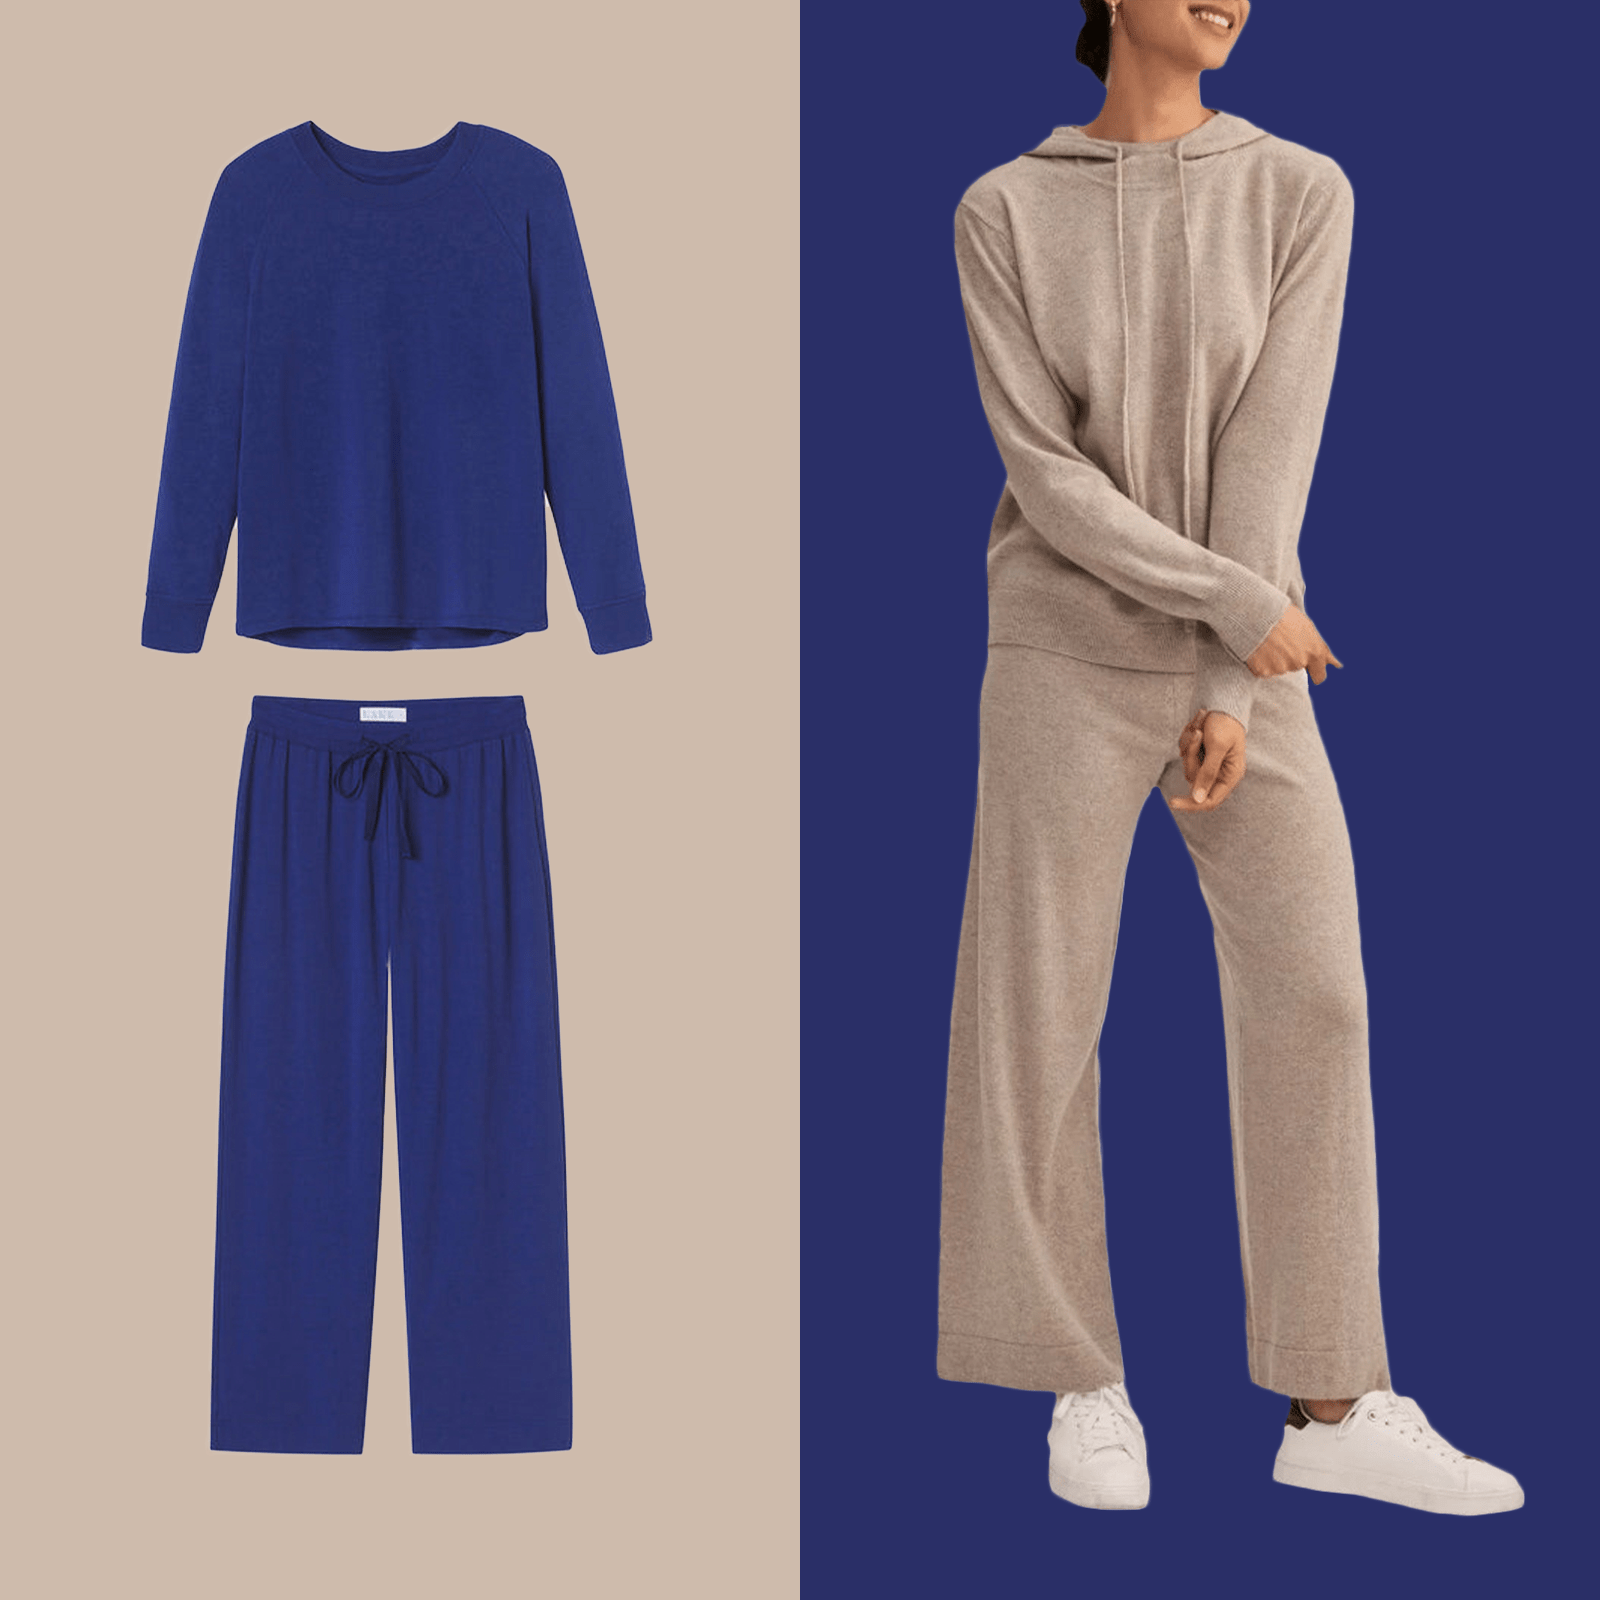 This 2 Piece Affordable Loungewear Set is Chic, Cozy & Comfortable